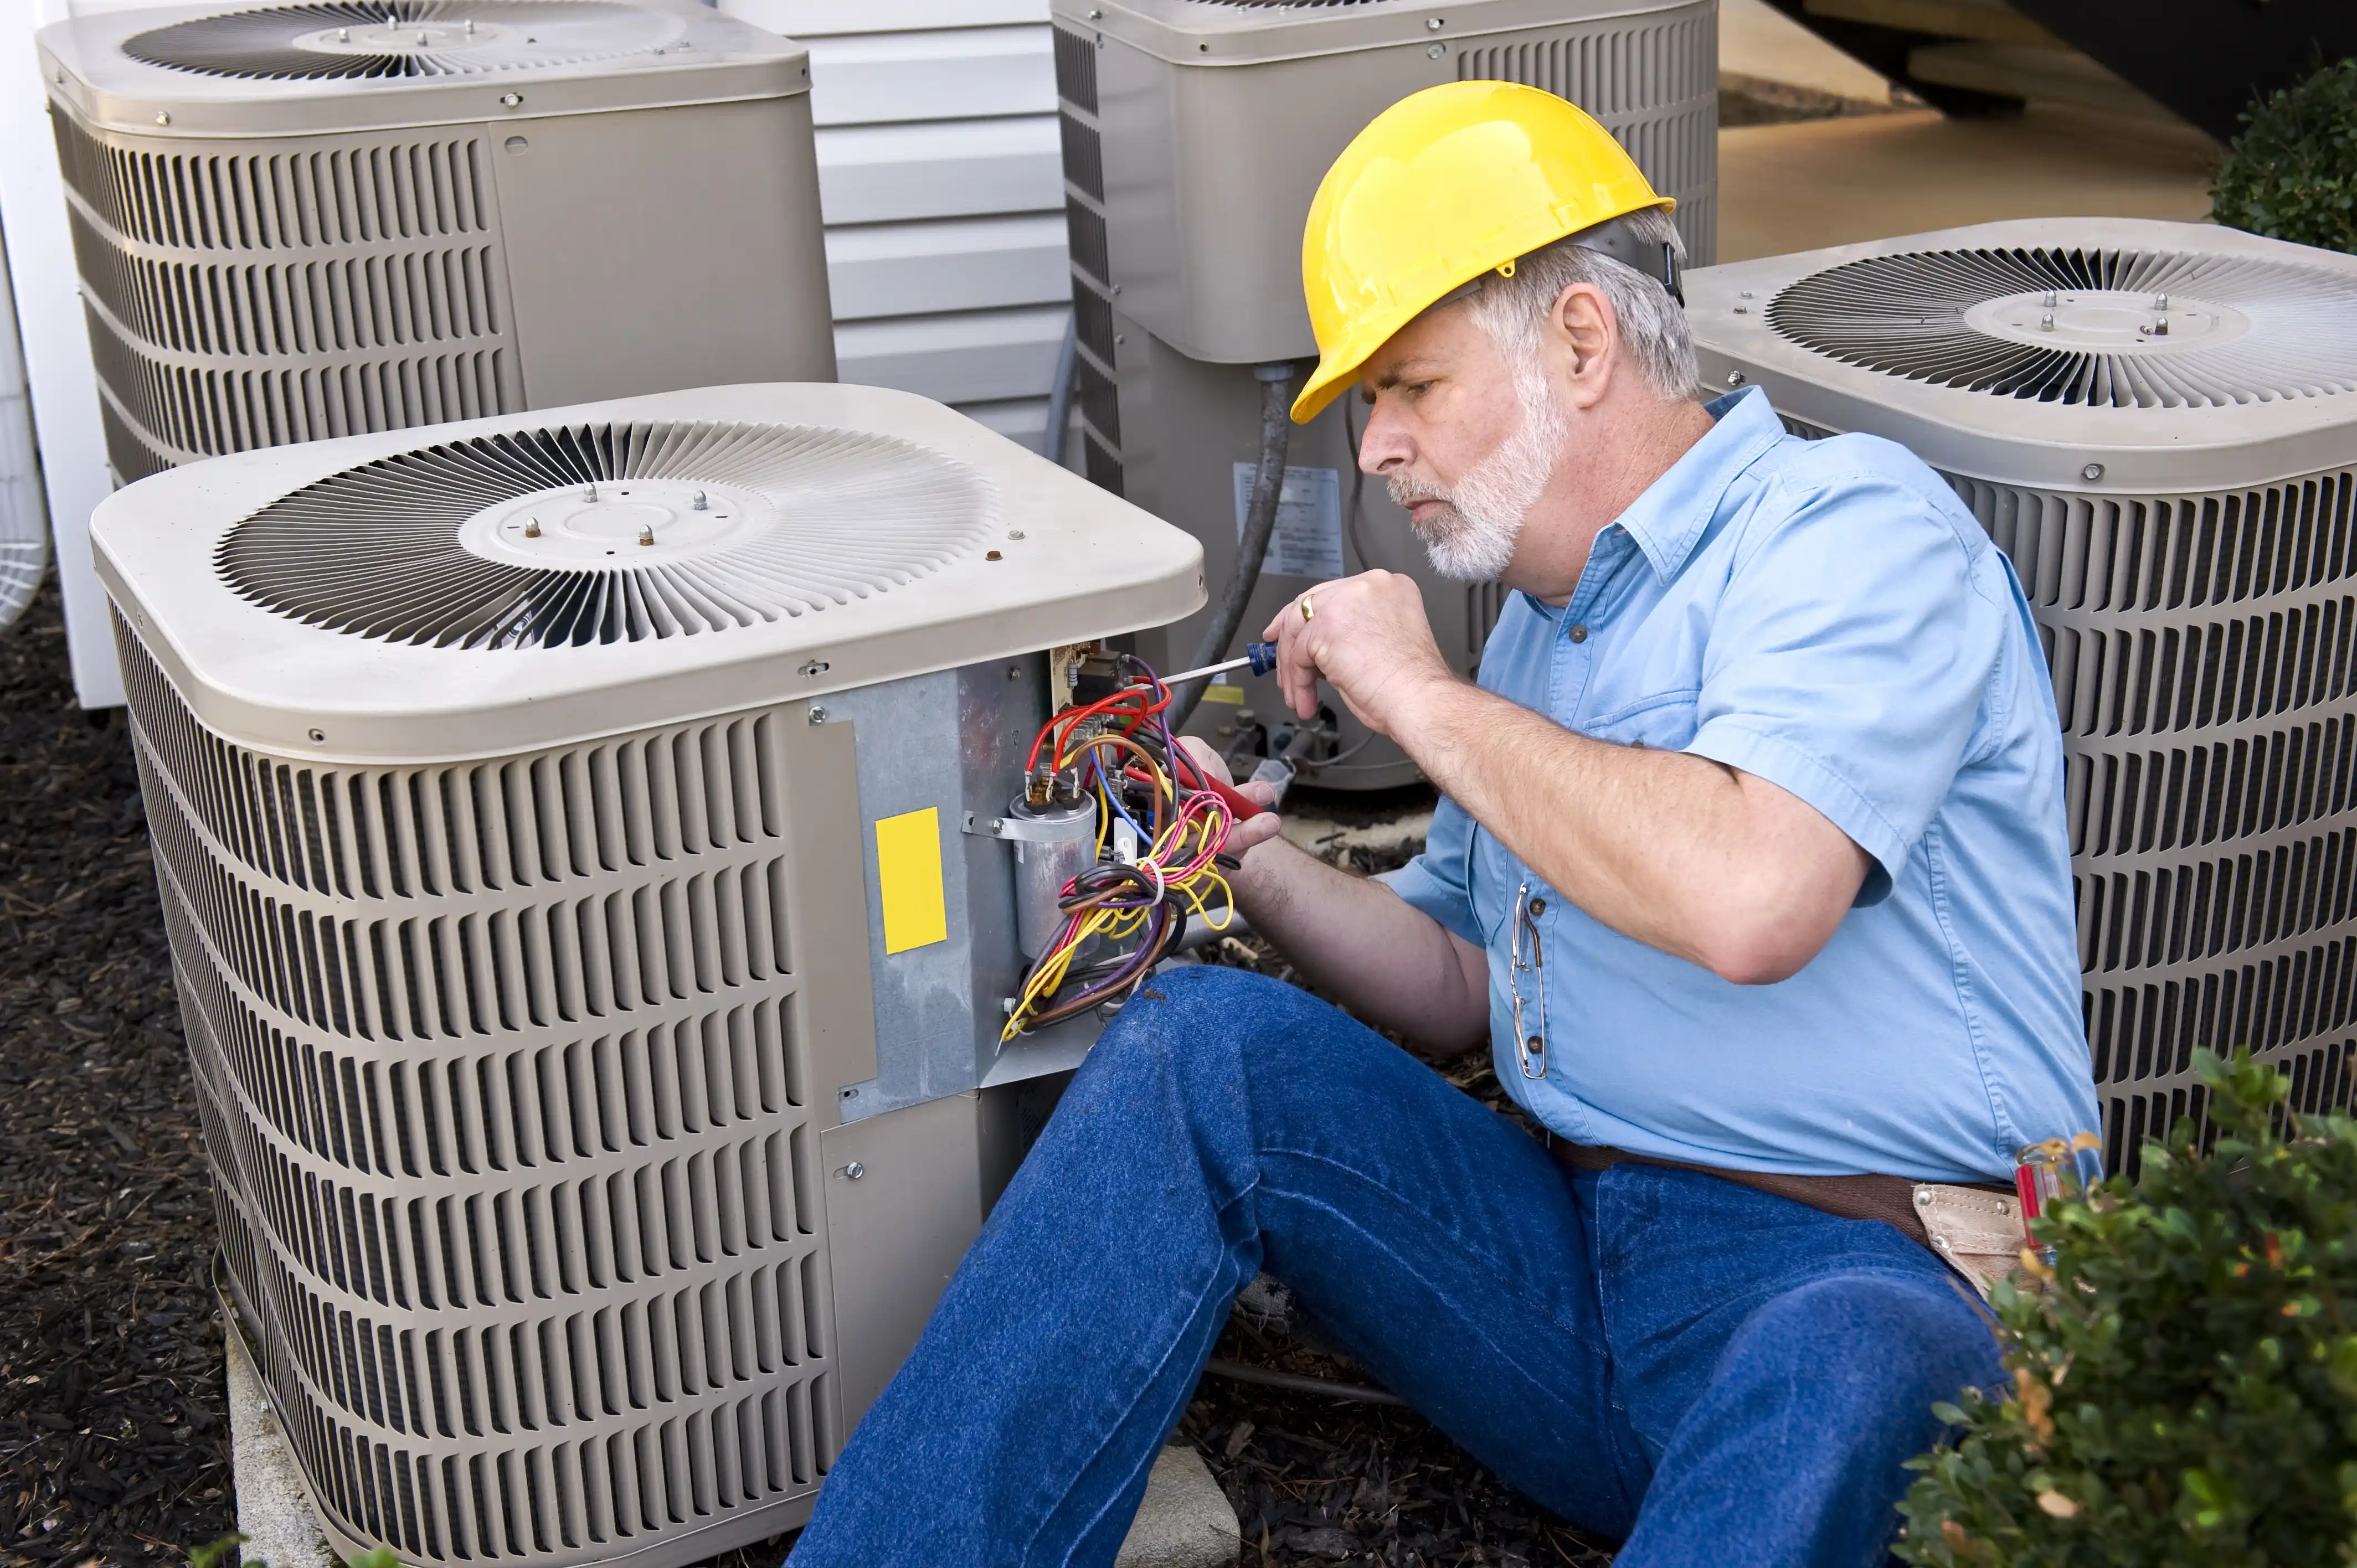 AC Repair Costs: Average Prices For Common Air Conditioning Problems